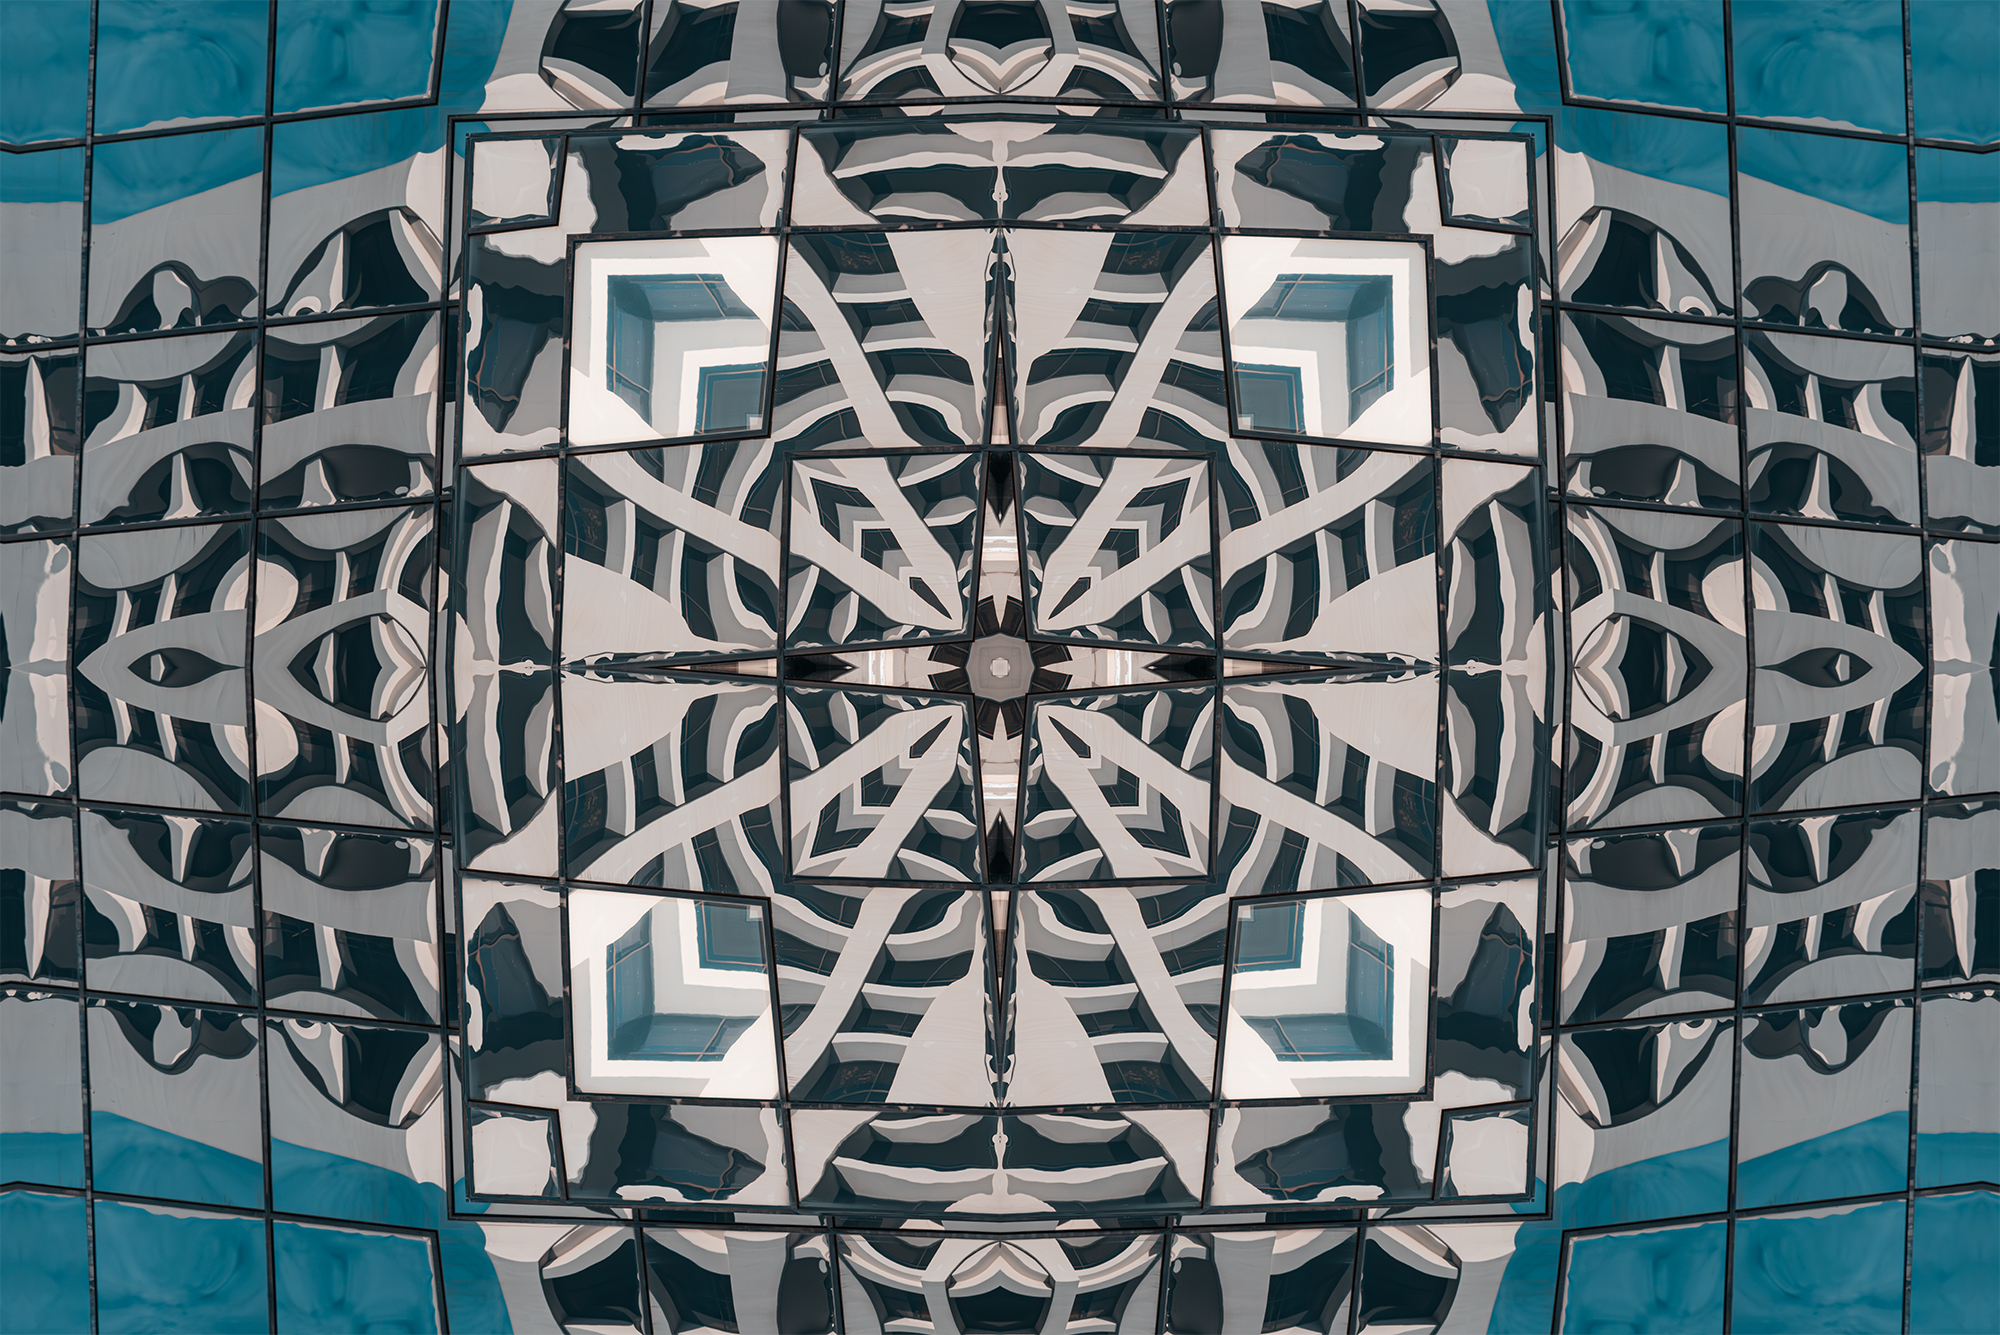  Exploring Harmonies and Symmetries: Unveiling the Beauty of the World Through Photography